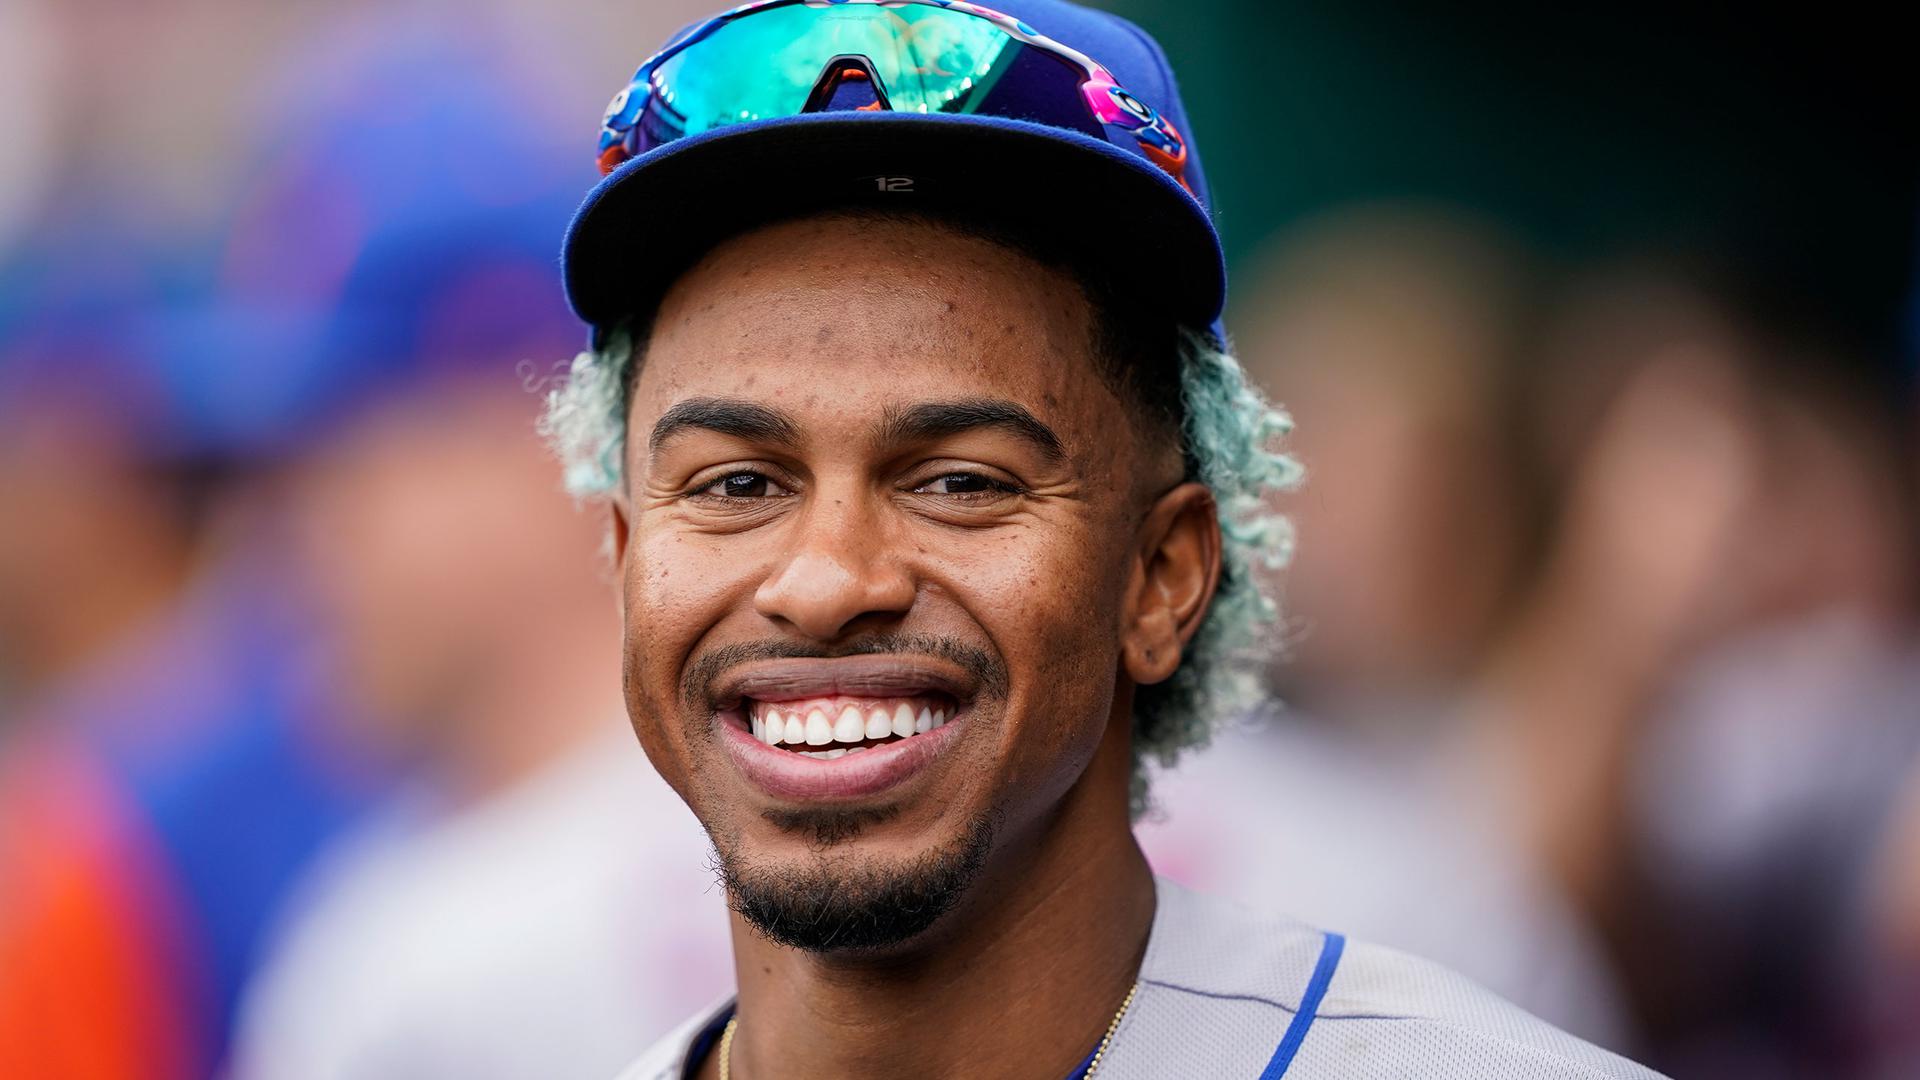 Francisco Lindor smiles and looks at the camera